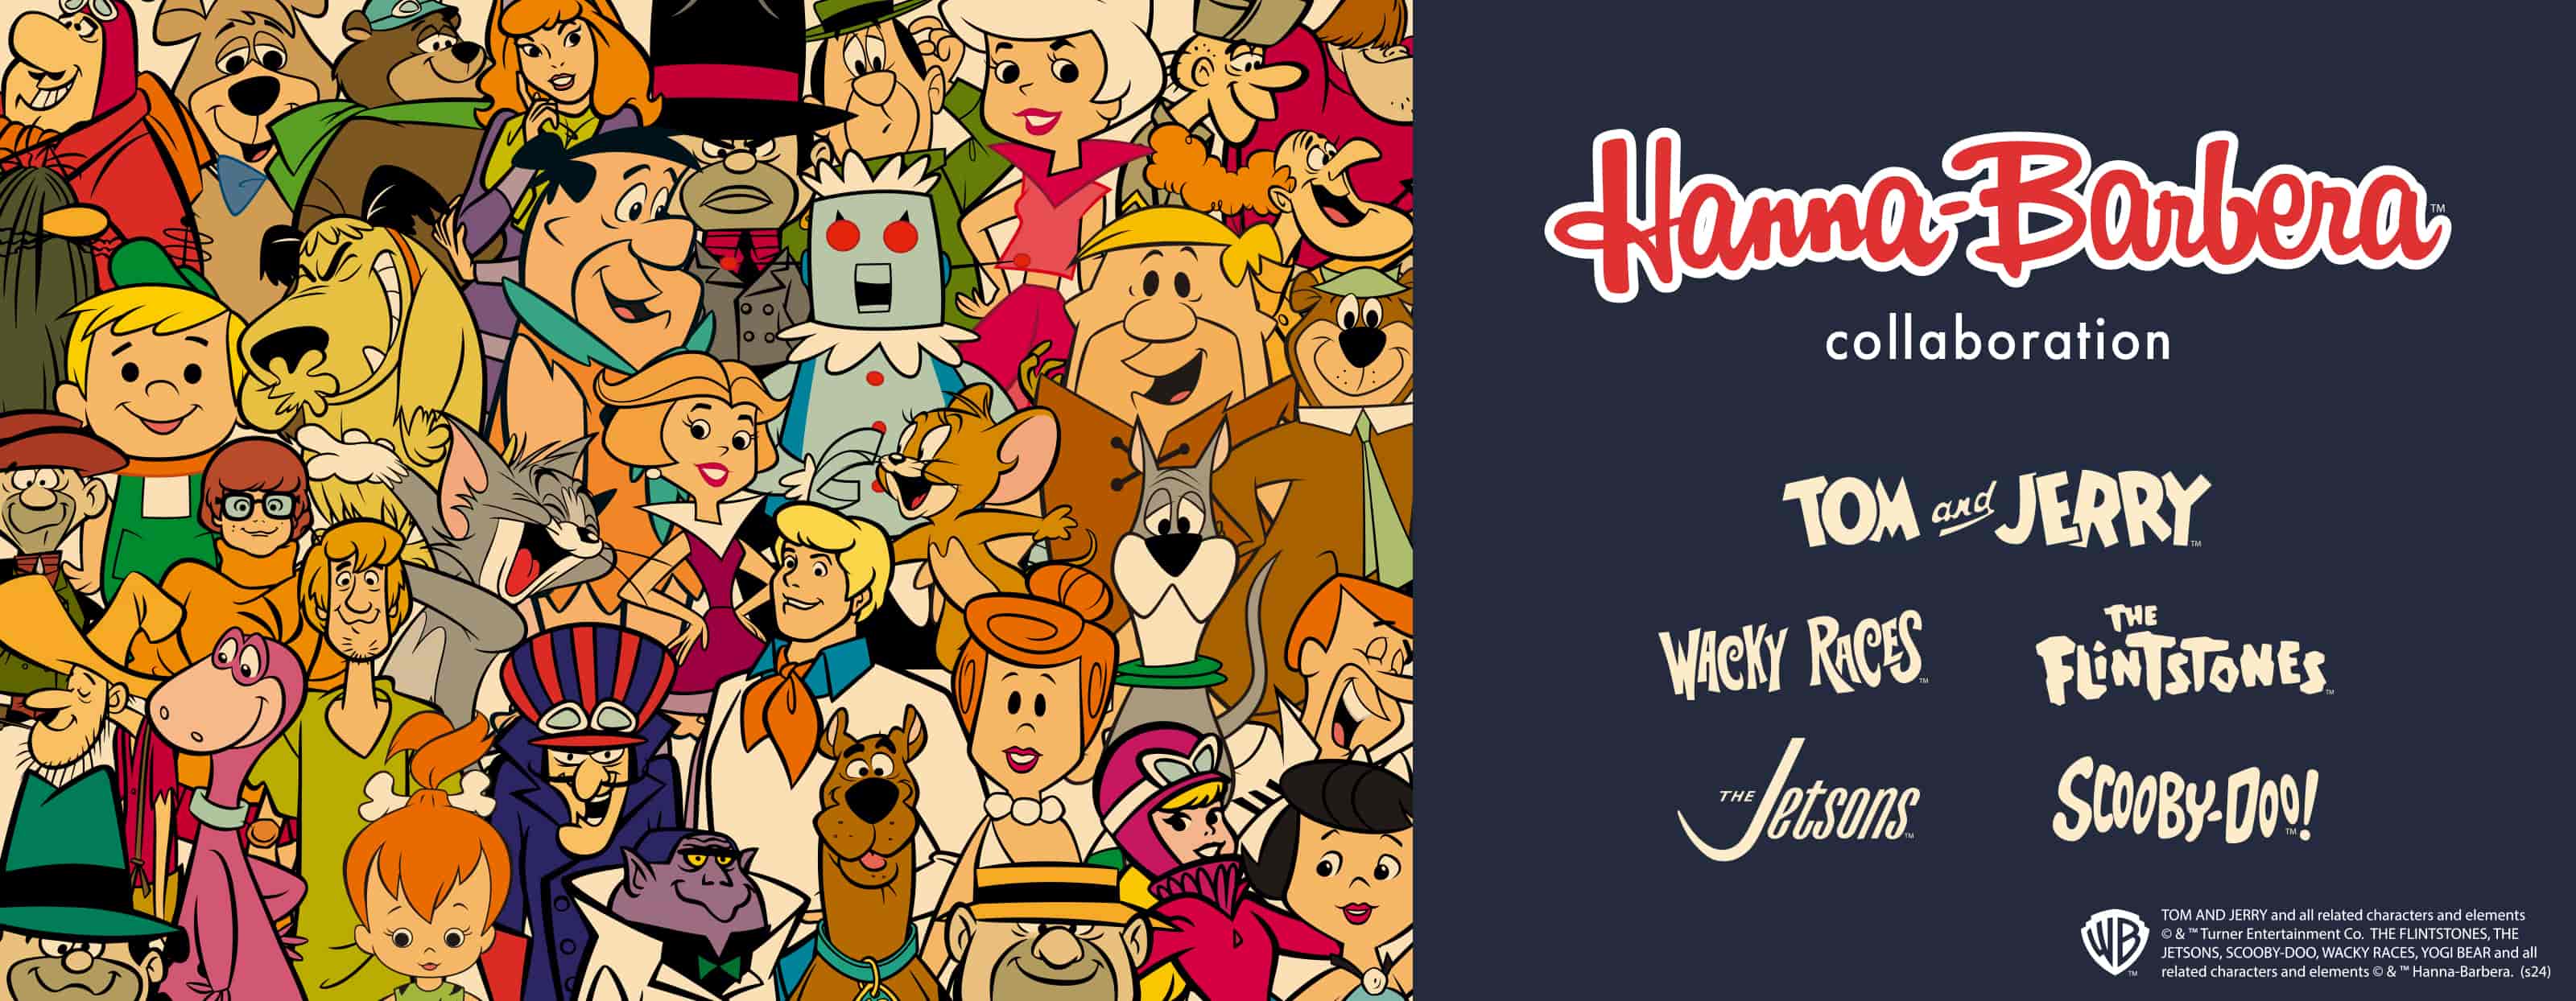 Hanna-Barbera, the creators behind numerous beloved animated works cherished worldwide, have given us iconic shows. From the popular “Tom and Jerry” to other classics like “The Flintstones”, “The Jetsons”, “Wacky Races”, and the quirky cast of “Scooby-Doo”.[ssorder:-20240422]